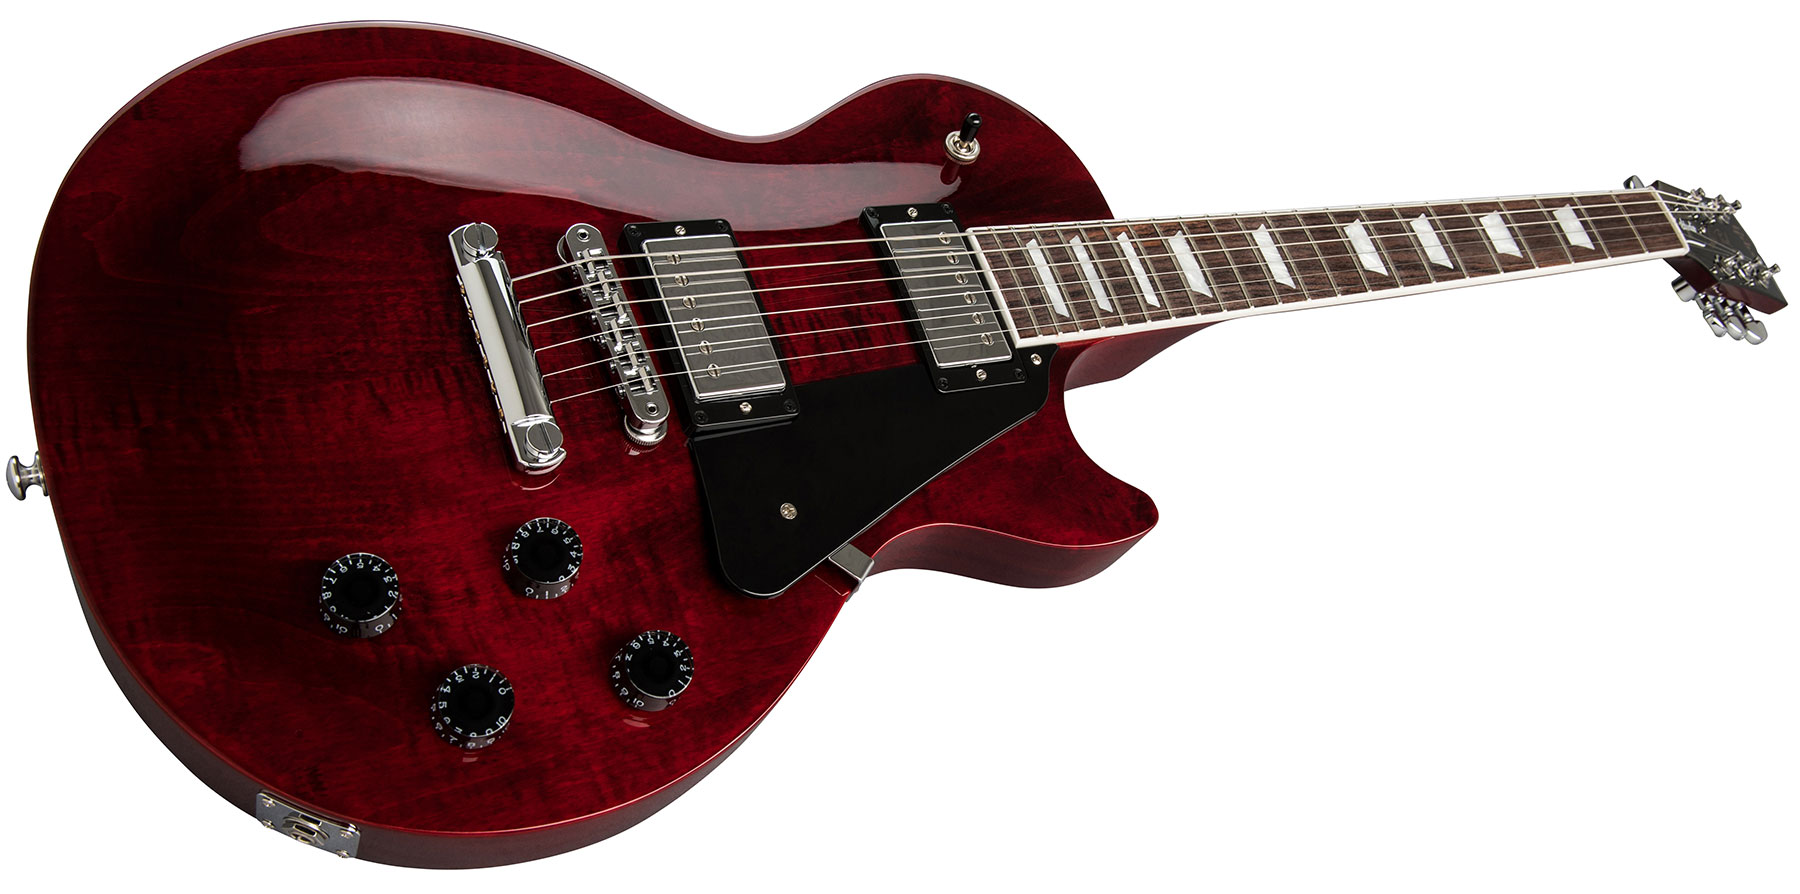 Gibson Les Paul Studio 2019 Hh Ht Rw - Wine Red - Single cut electric guitar - Variation 1